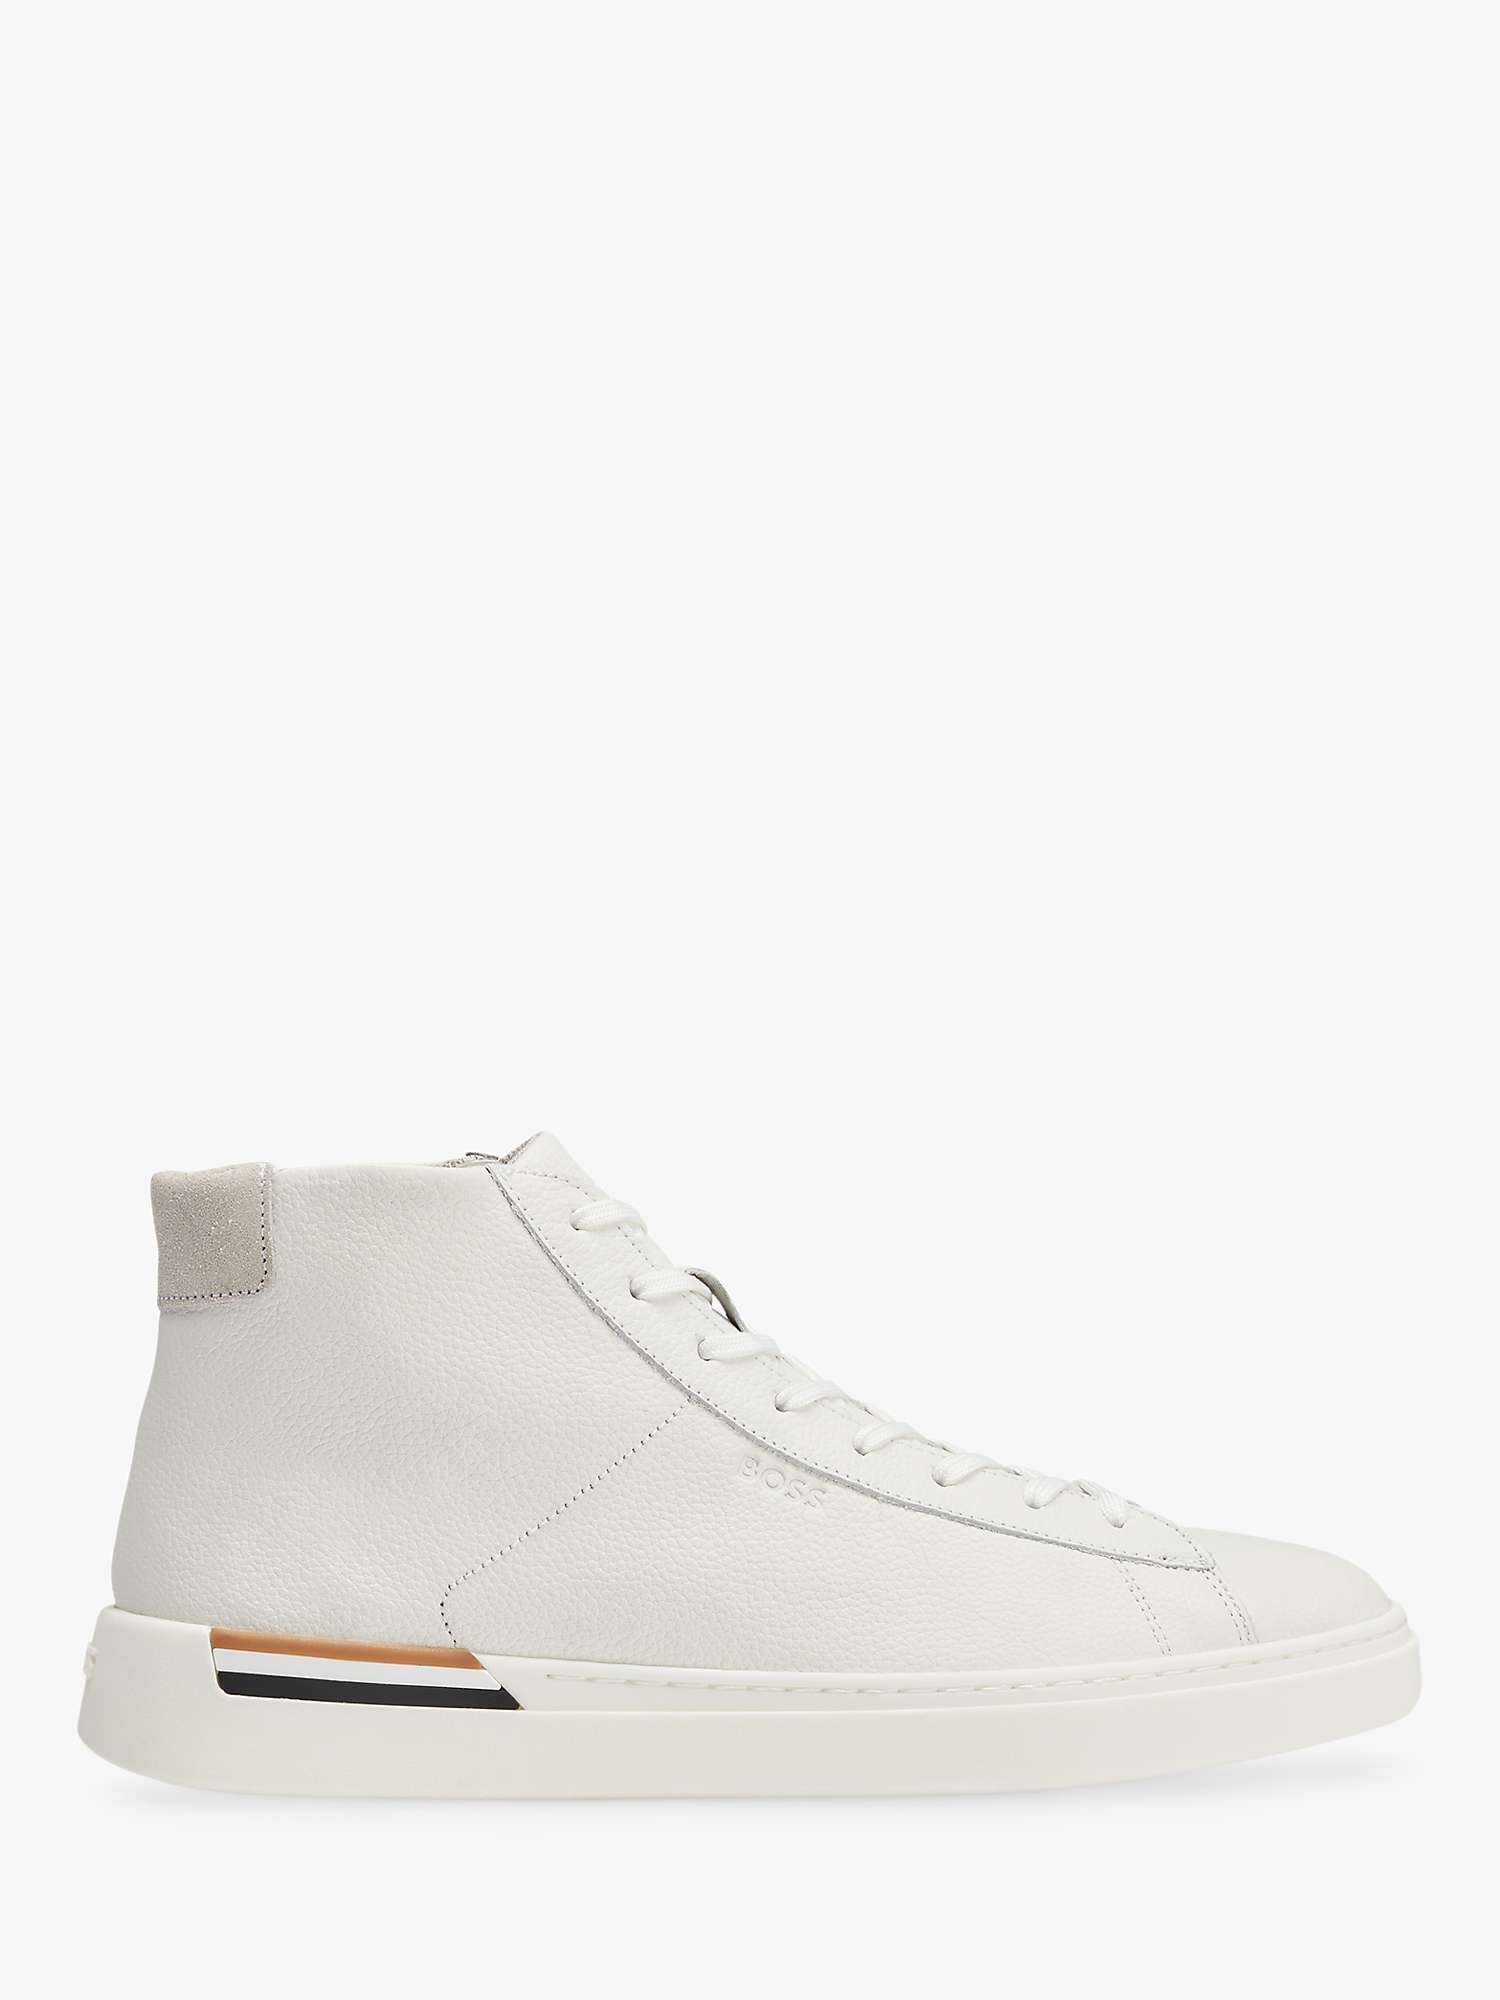 Buy BOSS Clint Hito High-Top Trainers Online at johnlewis.com